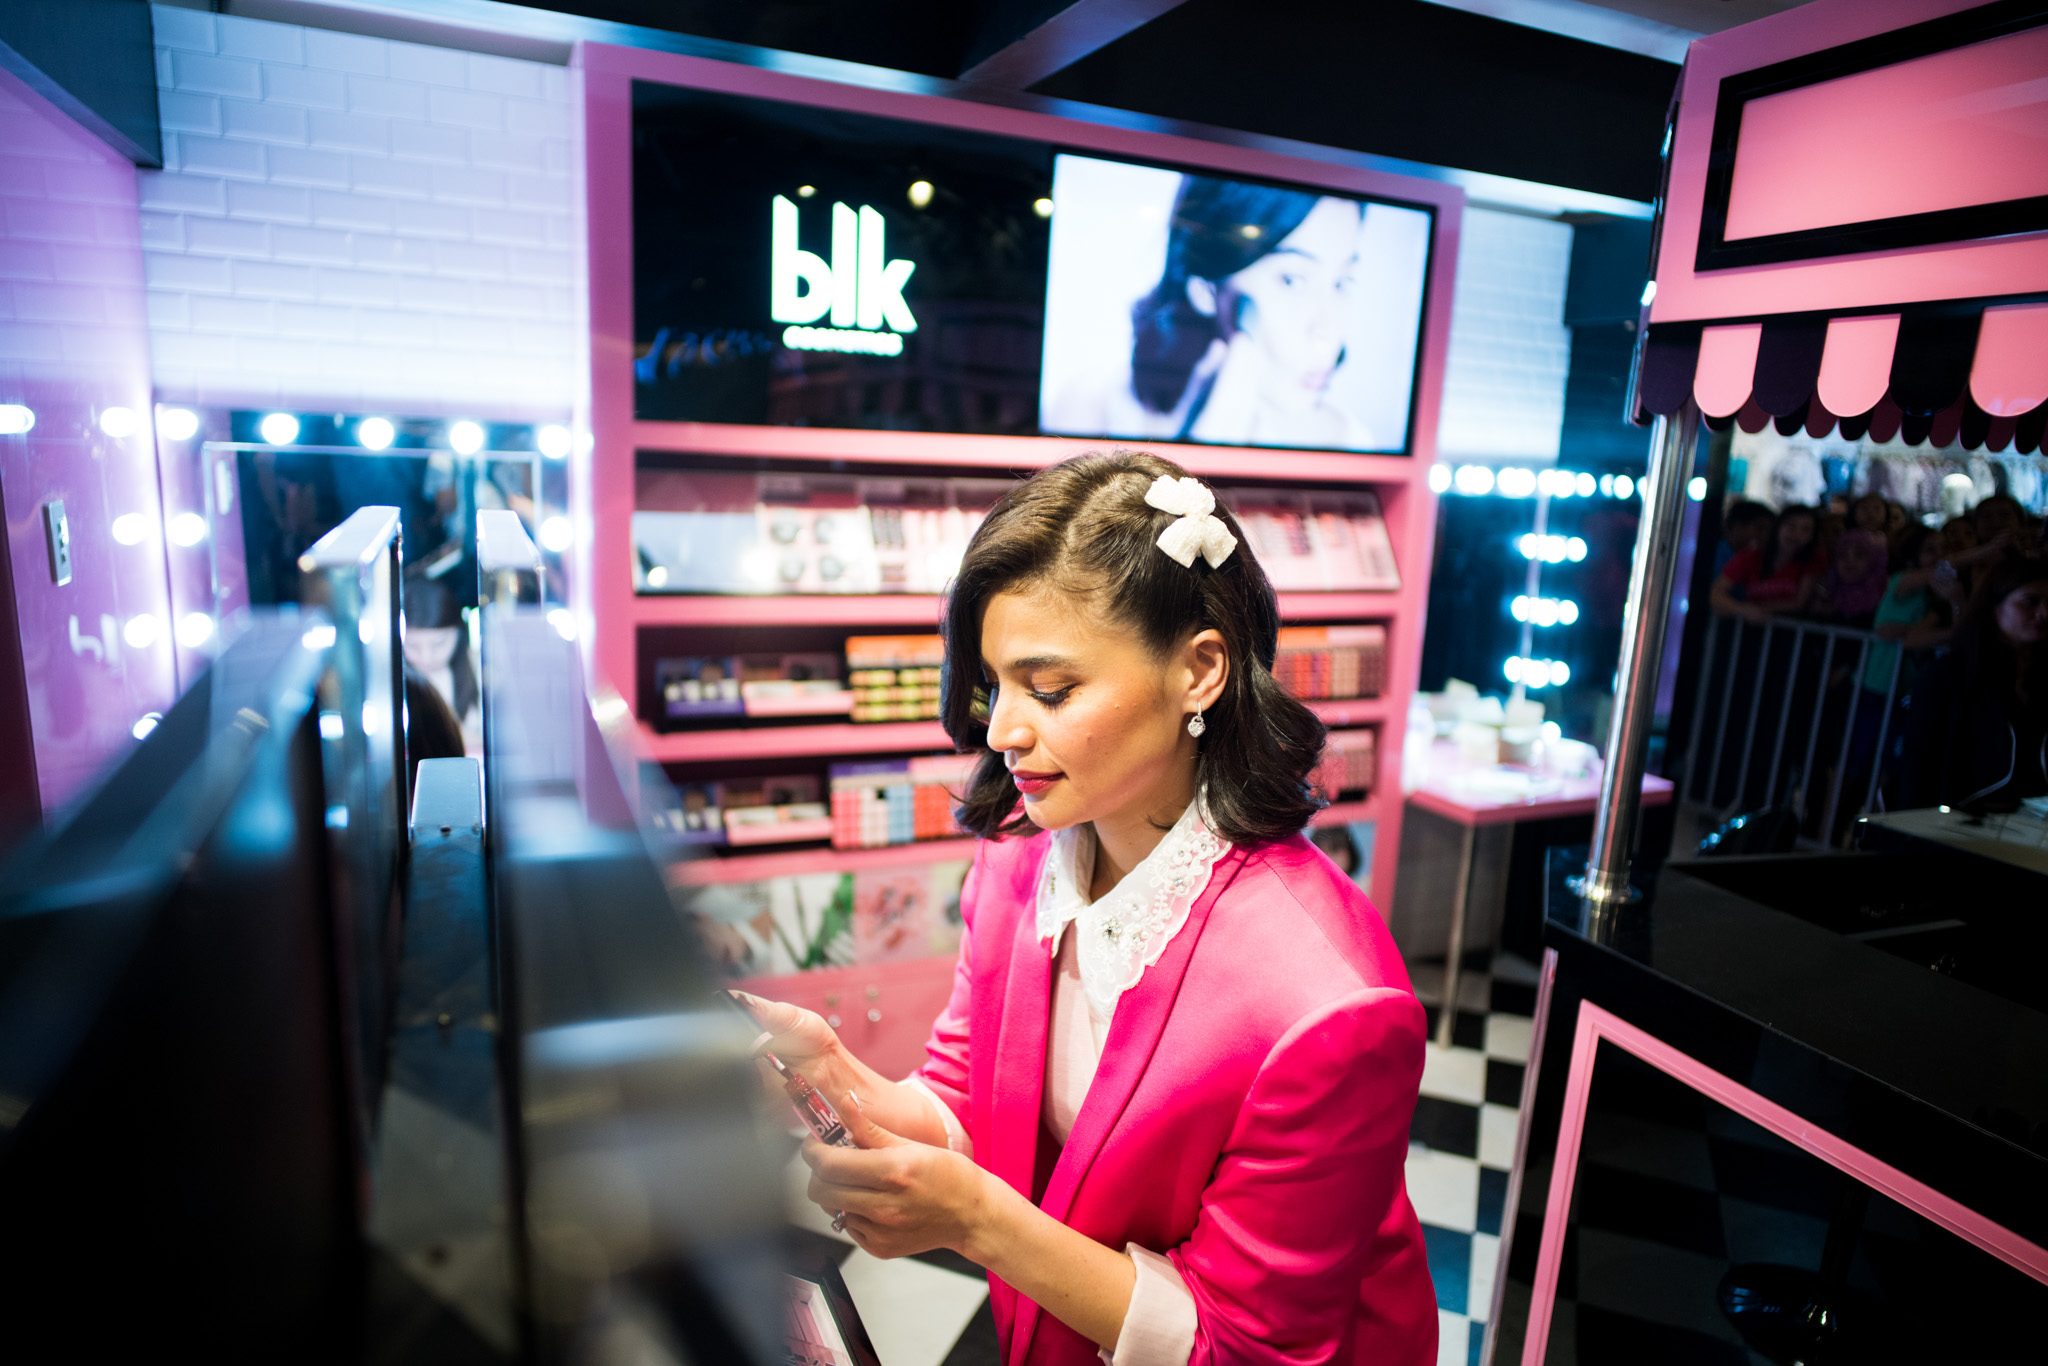 BLK BEAUTY. Anne goes through the makeup at the blk boutique. 